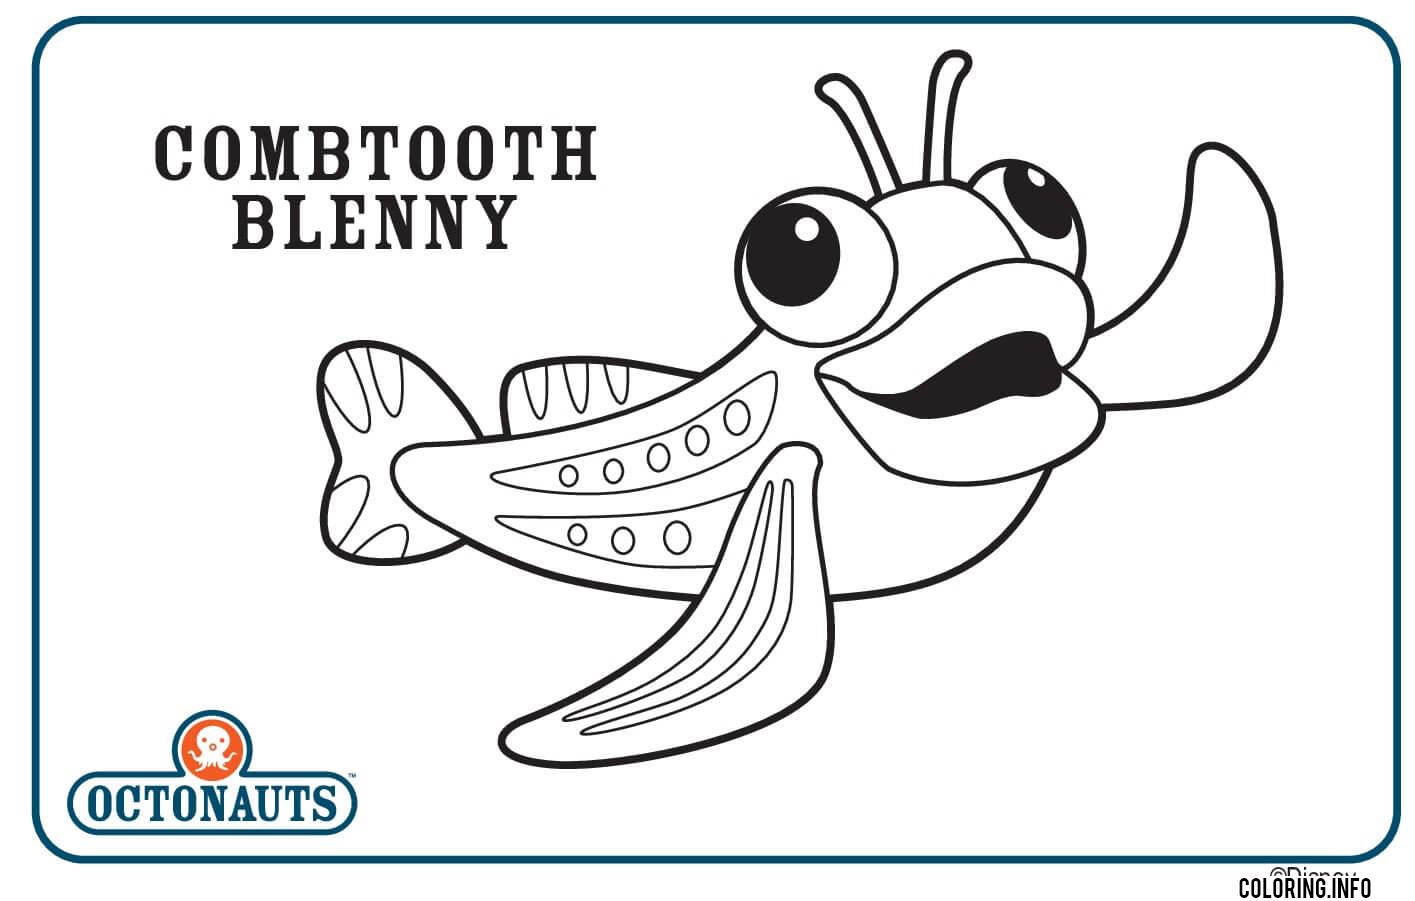 Combtooth Blenny Octonaut Creature coloring